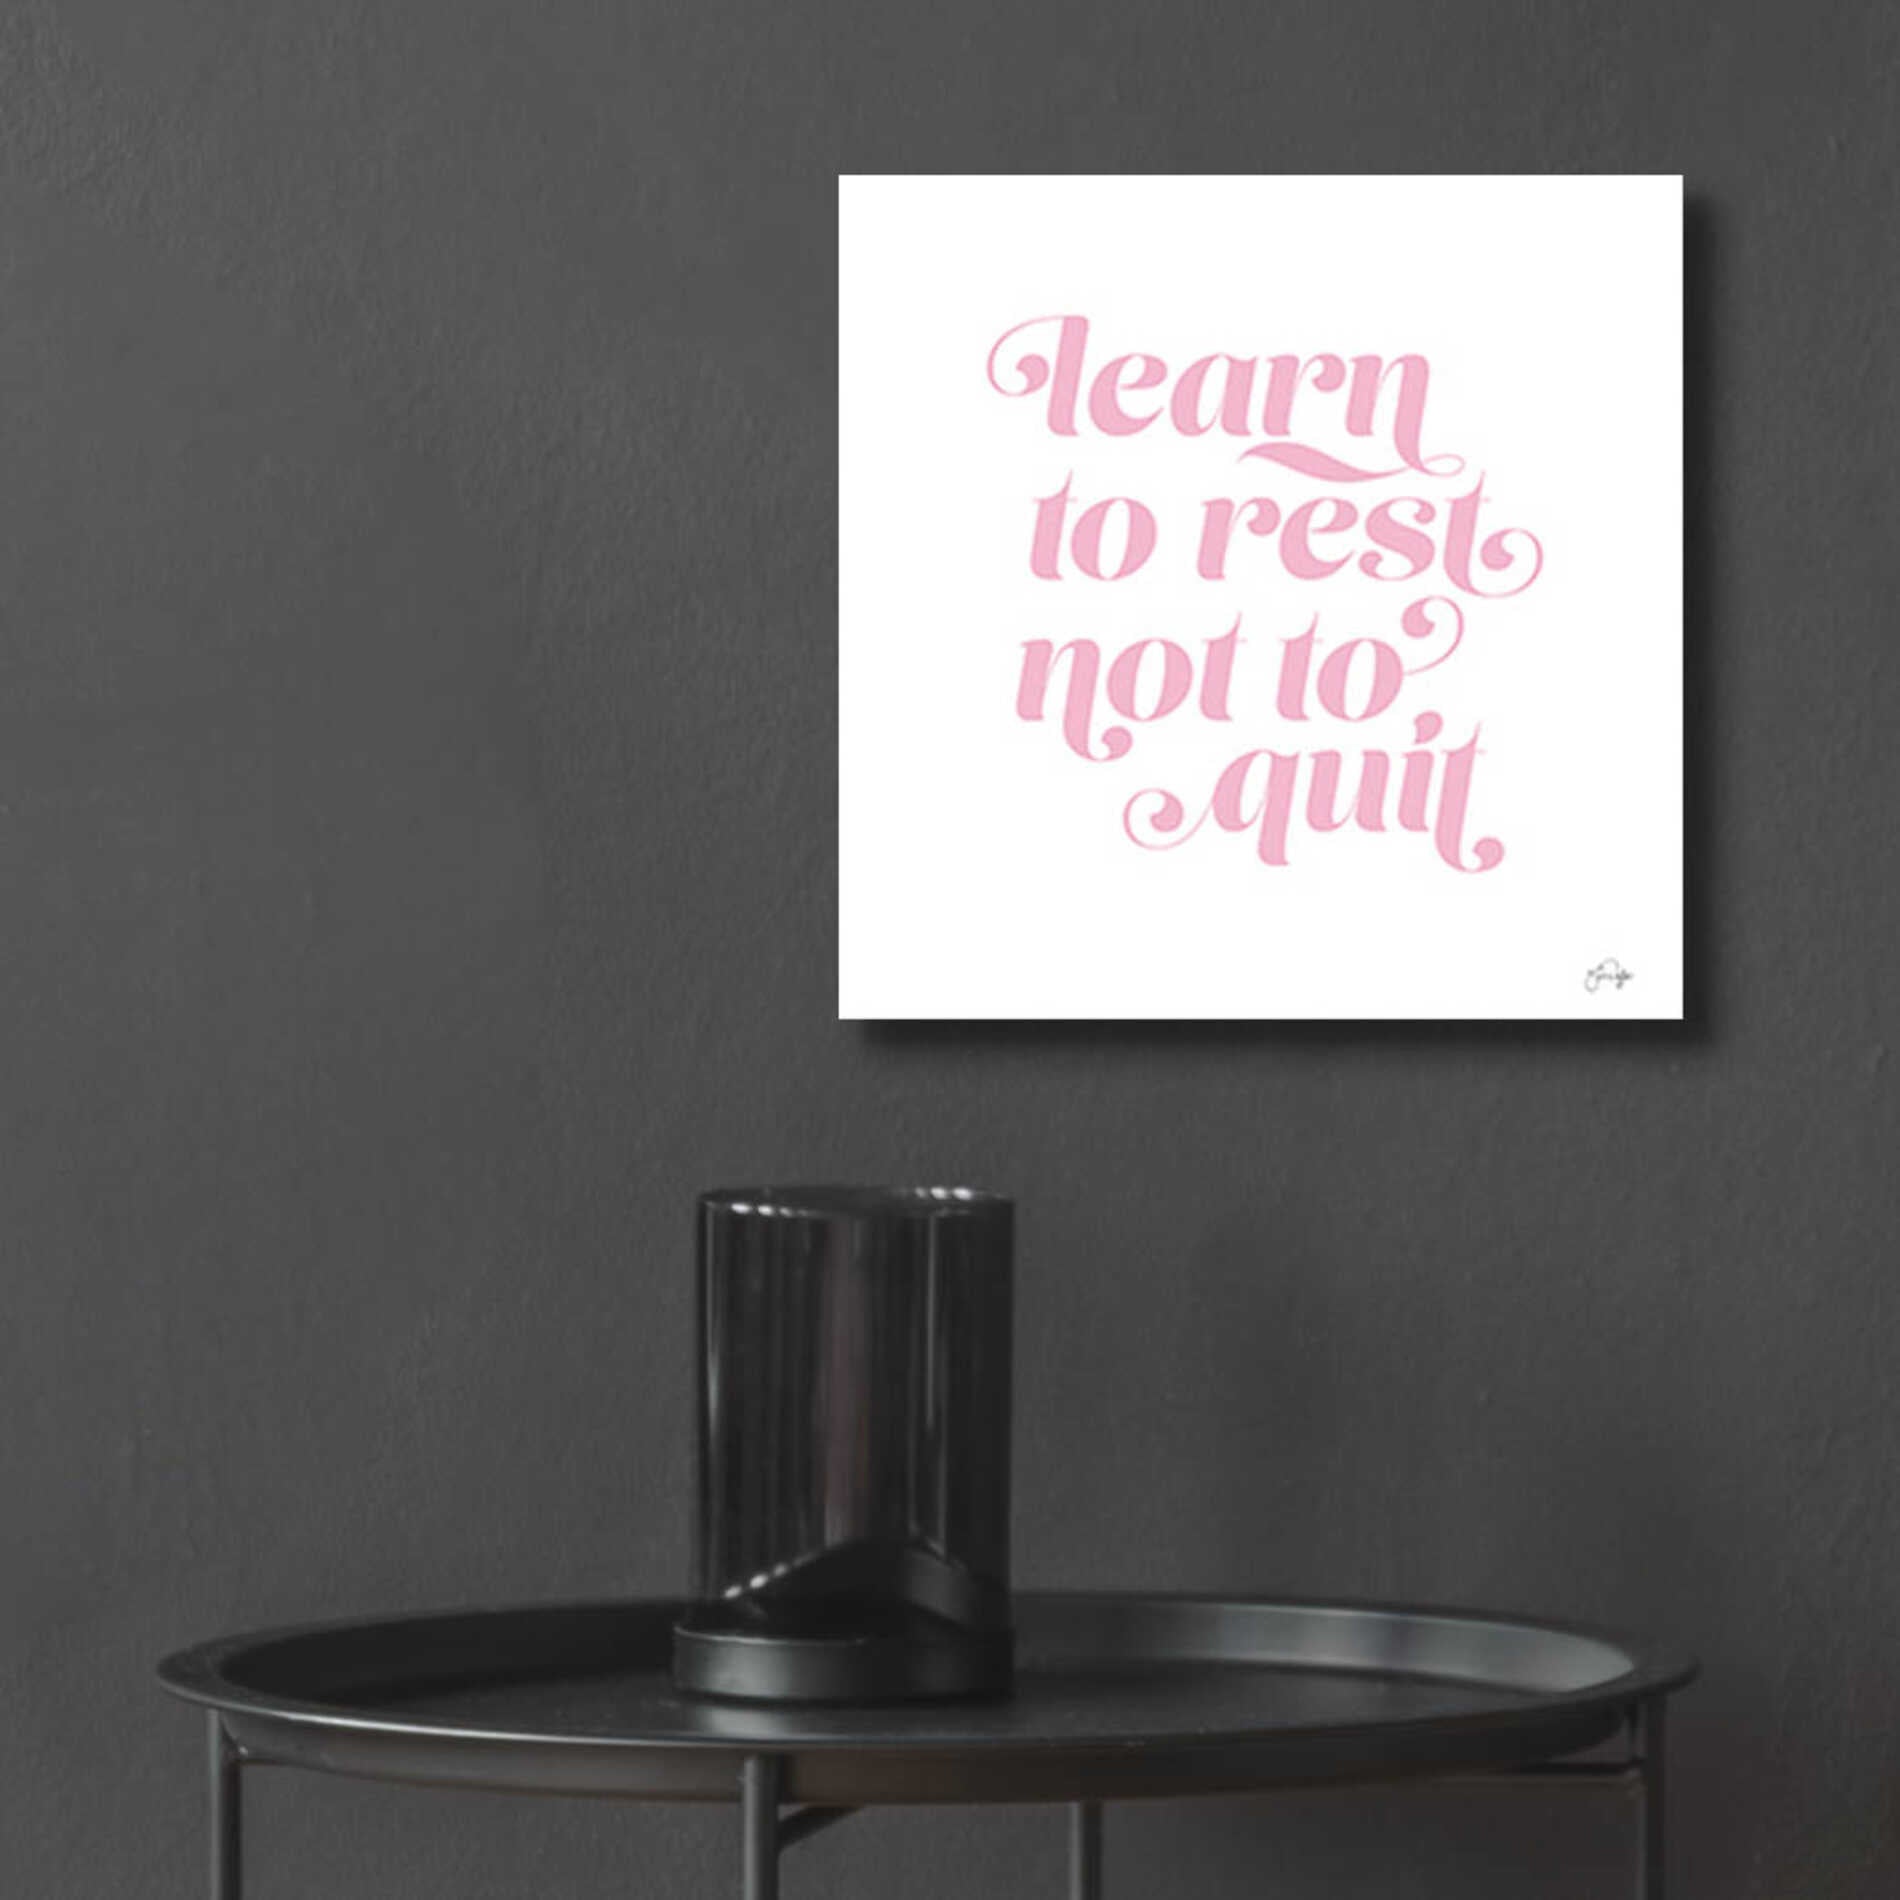 Epic Art 'Learn to Rest - Not to Quit' by Yass Naffas Designs, Acrylic Glass Wall Art,12x12